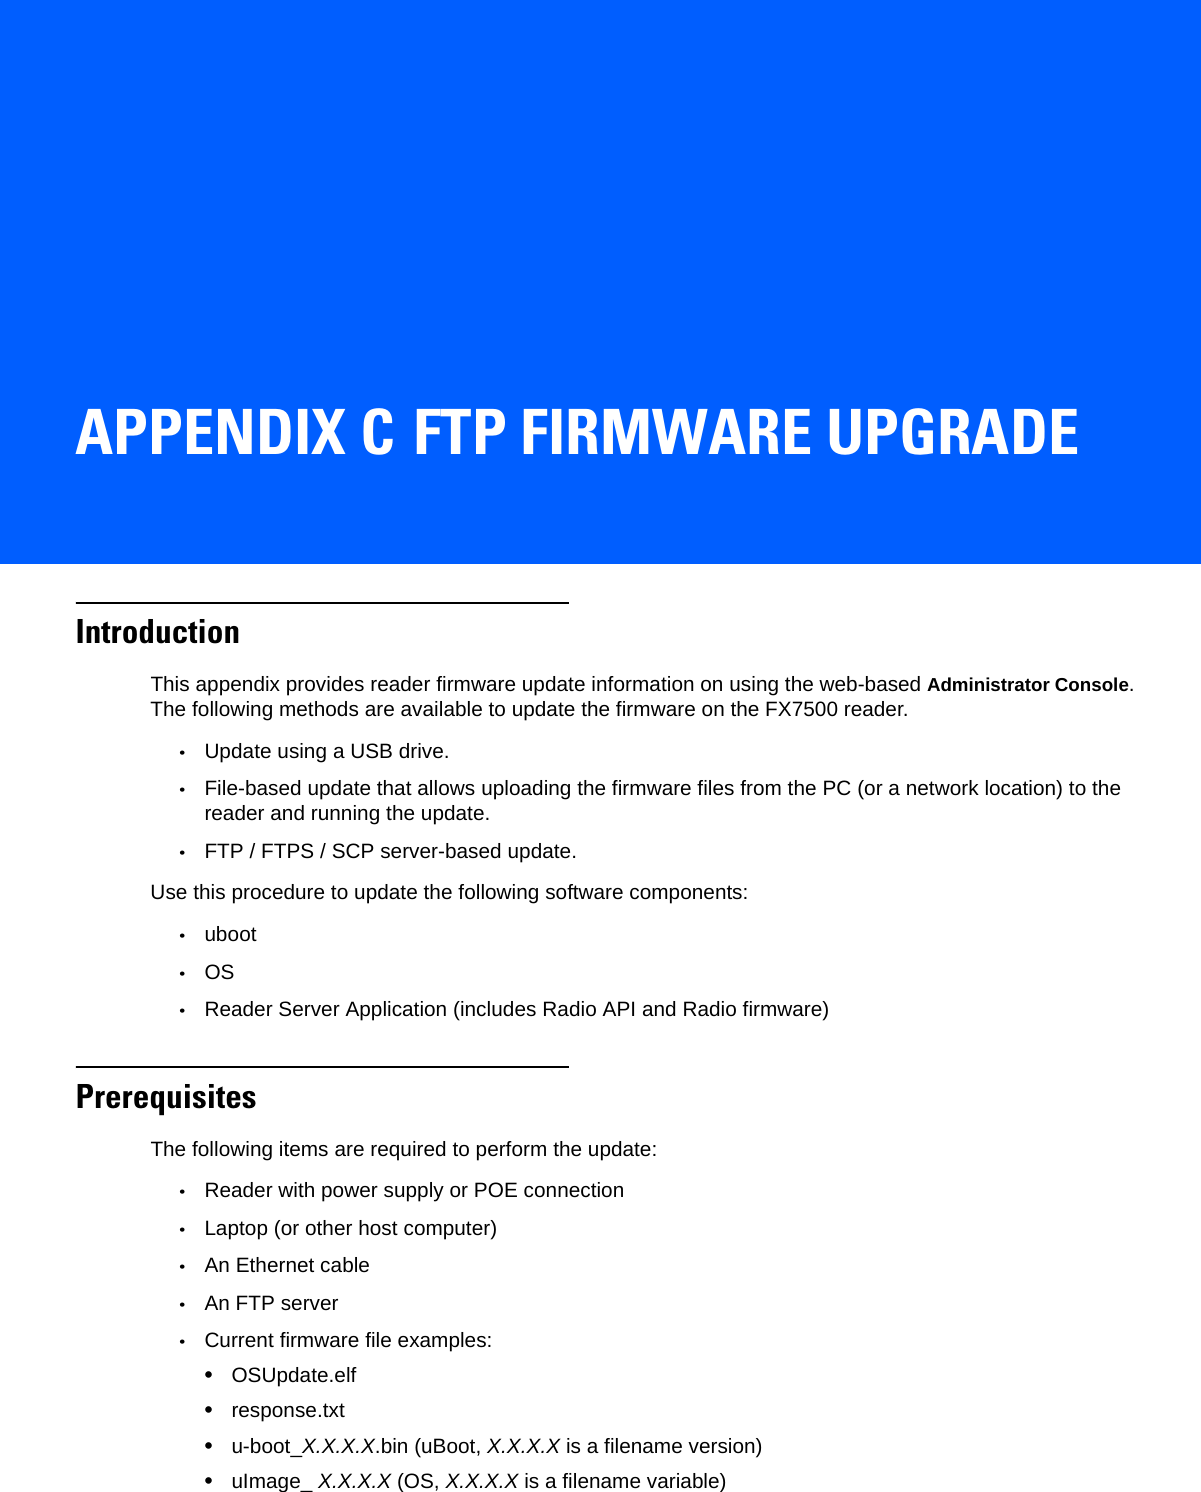 APPENDIX C FTP FIRMWARE UPGRADEIntroductionThis appendix provides reader firmware update information on using the web-based Administrator Console. The following methods are available to update the firmware on the FX7500 reader.•Update using a USB drive.•File-based update that allows uploading the firmware files from the PC (or a network location) to the reader and running the update.•FTP / FTPS / SCP server-based update.Use this procedure to update the following software components:•uboot •OS •Reader Server Application (includes Radio API and Radio firmware)PrerequisitesThe following items are required to perform the update:•Reader with power supply or POE connection•Laptop (or other host computer)•An Ethernet cable•An FTP server •Current firmware file examples: •OSUpdate.elf•response.txt•u-boot_X.X.X.X.bin (uBoot, X.X.X.X is a filename version)•uImage_ X.X.X.X (OS, X.X.X.X is a filename variable) 